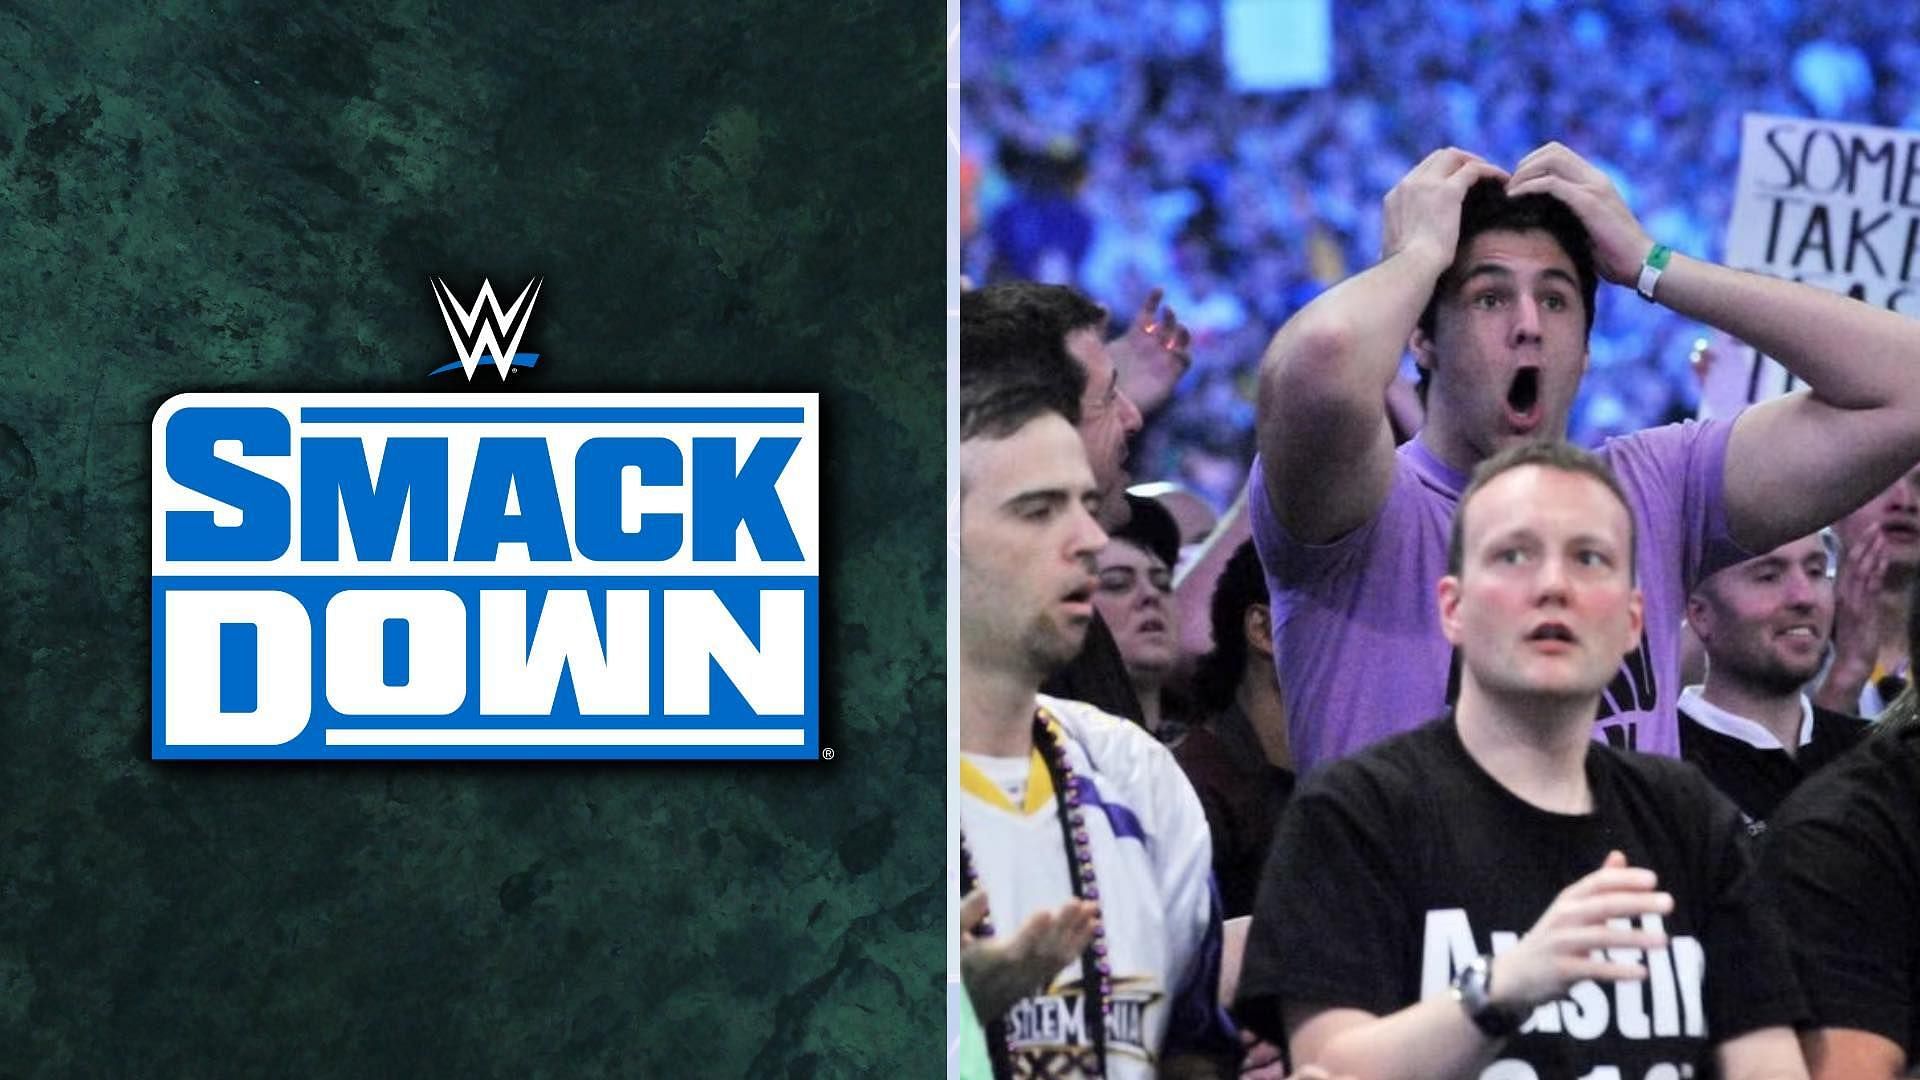 WWE SmackDown this week was live from Frost Bank Center in San Antonio, Texas